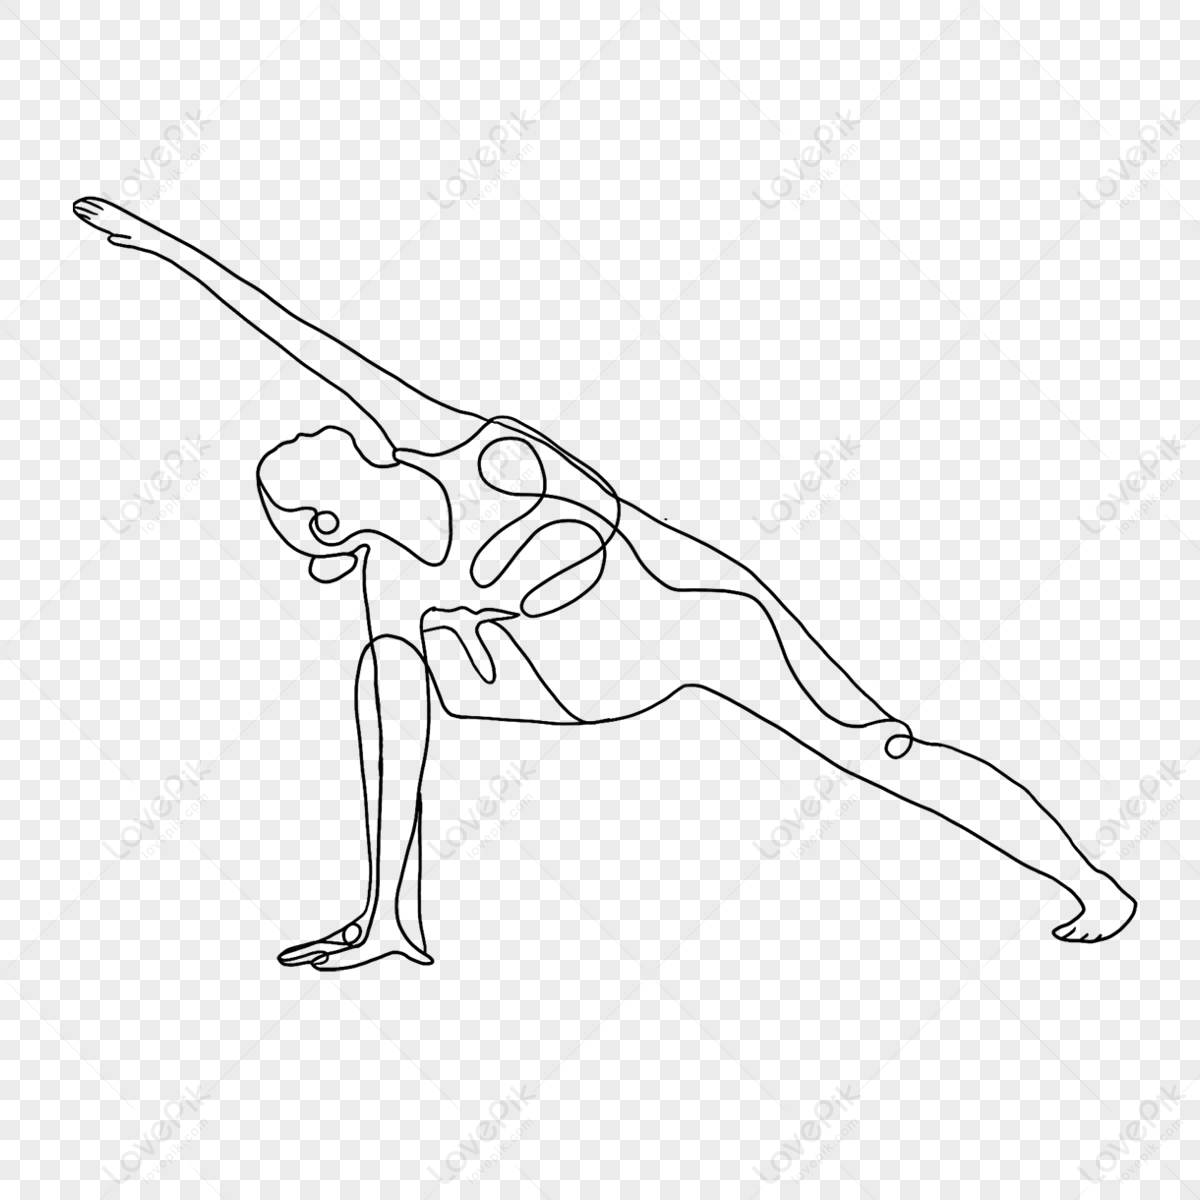 Yoga drawing :How to YOGA MEDITATION Drawing - Yoga drawing images | Drawing  Extra - YouTube